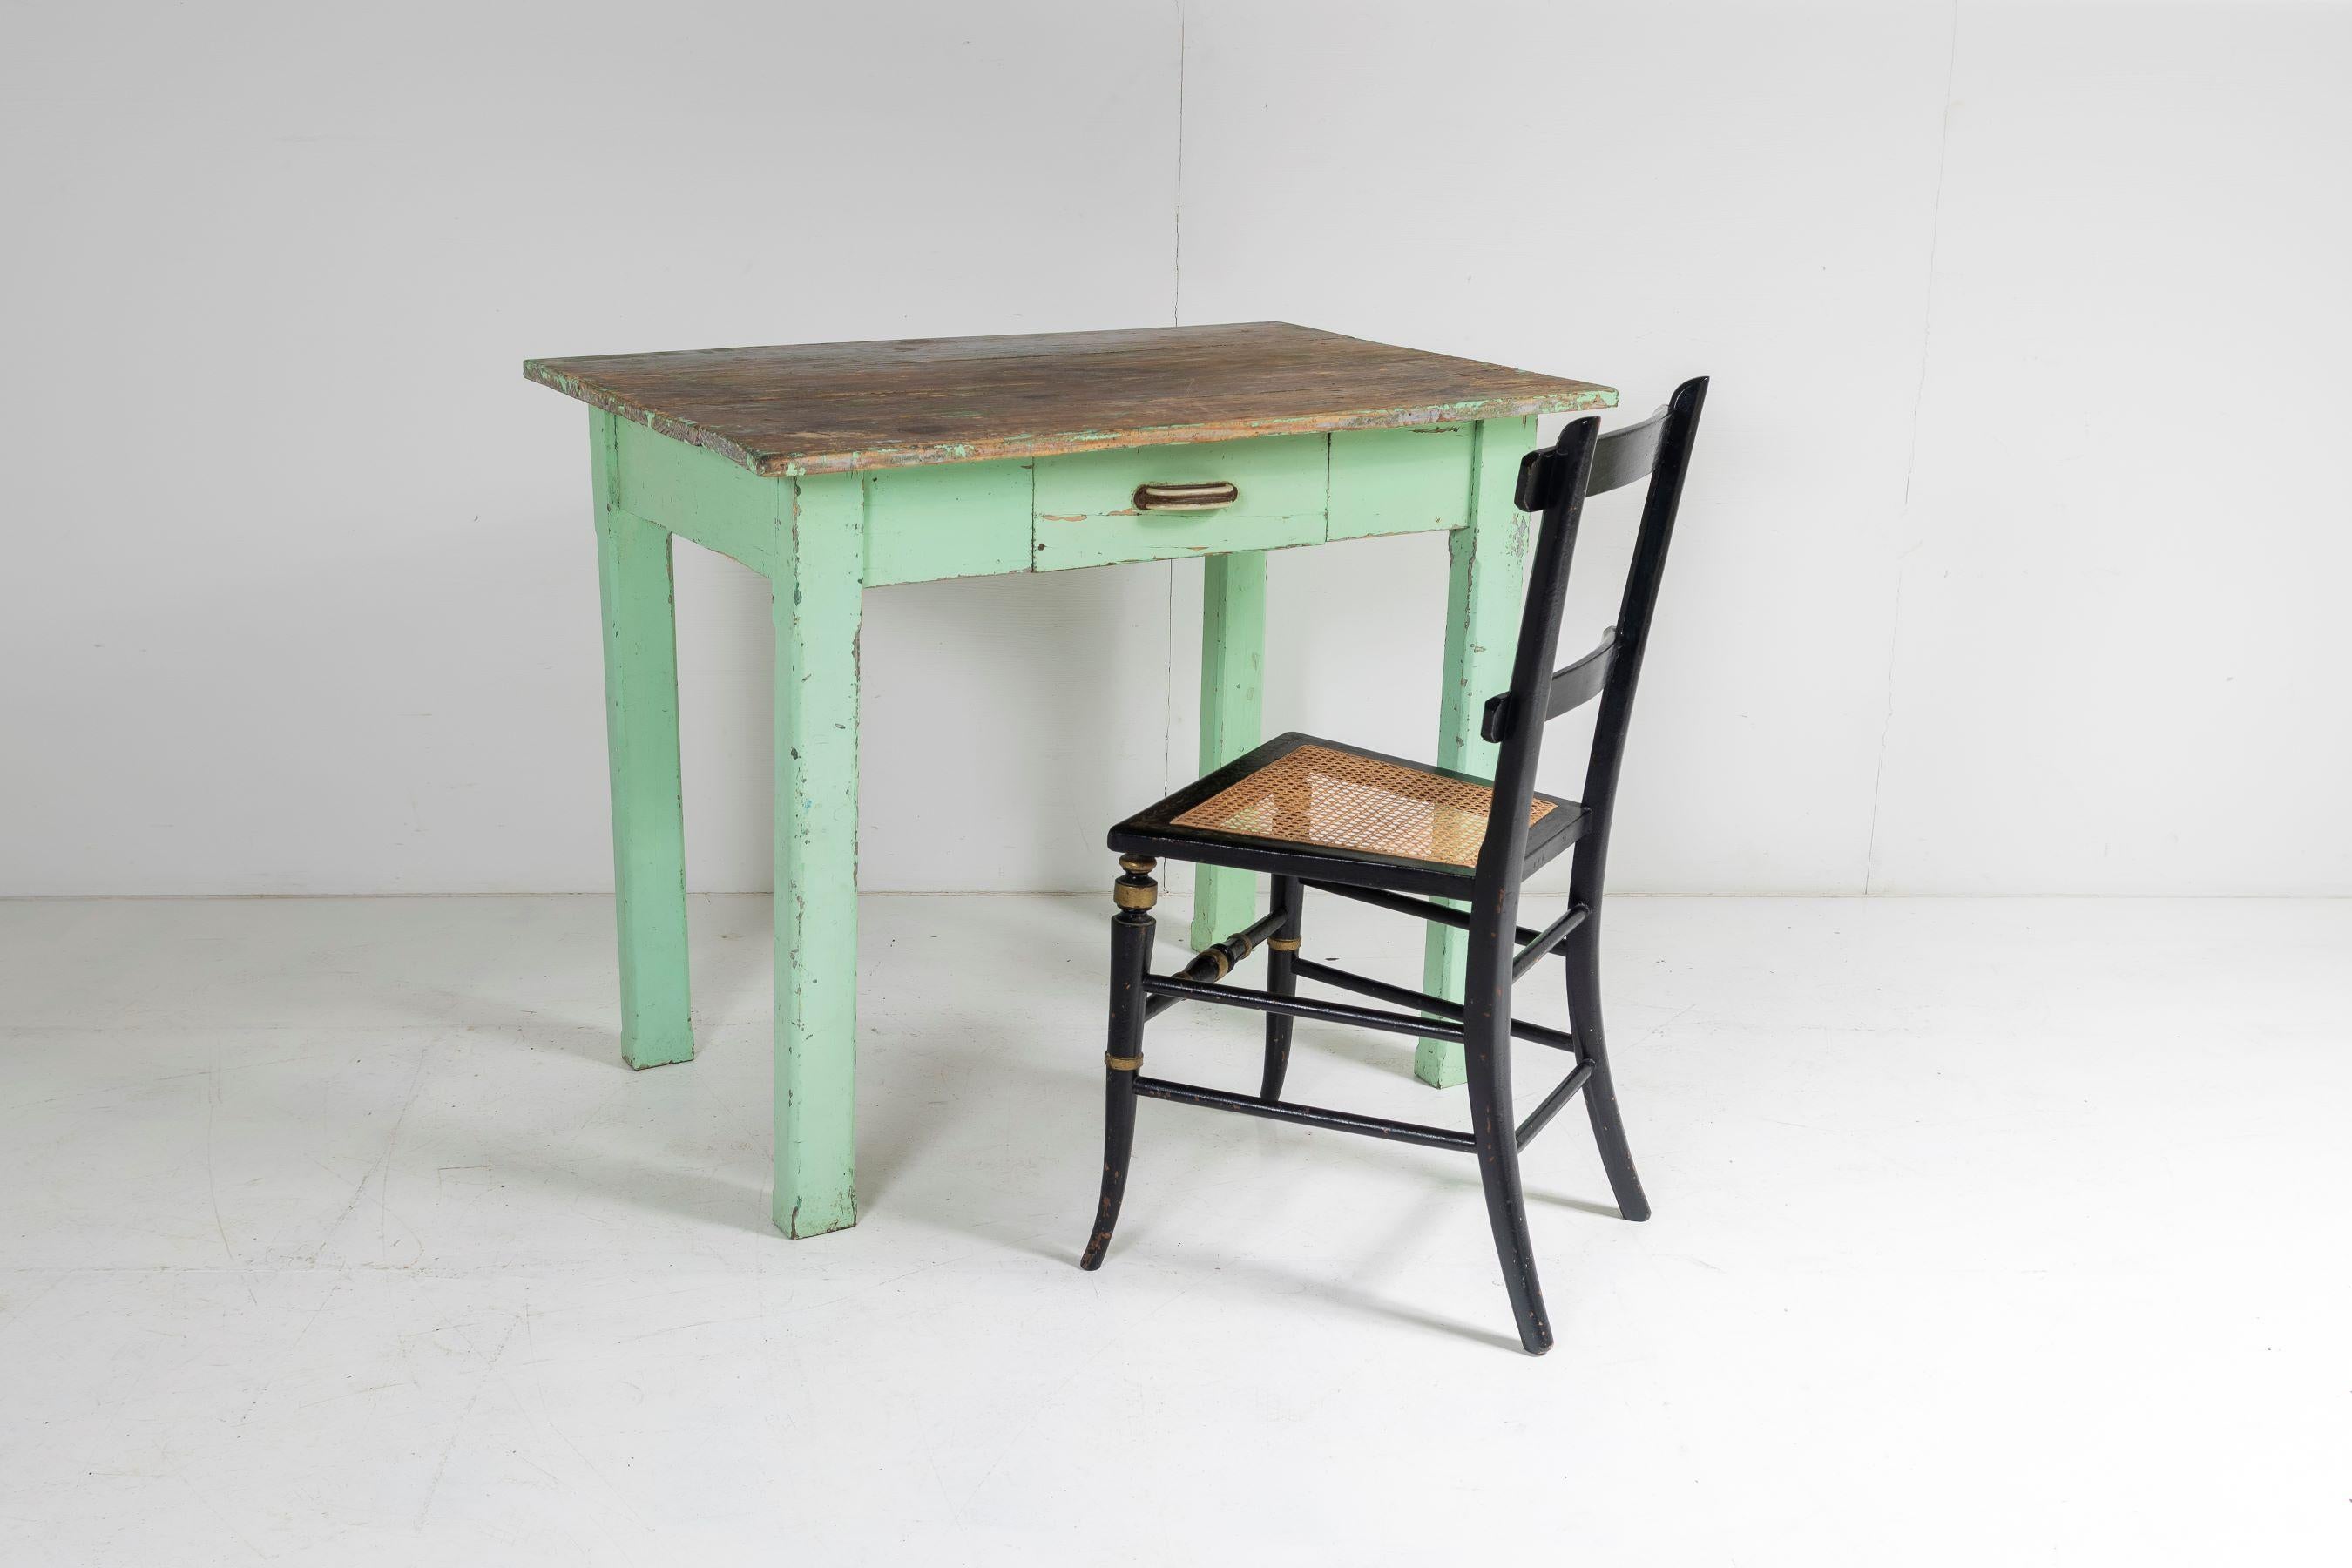 A completely original painted pine Welsh farmhouse table in a fantastic green colour.  This would have originally been a small kitchen table, a primitive simply made table yet highly decorative.  Early 1900s, this example would work equally well as